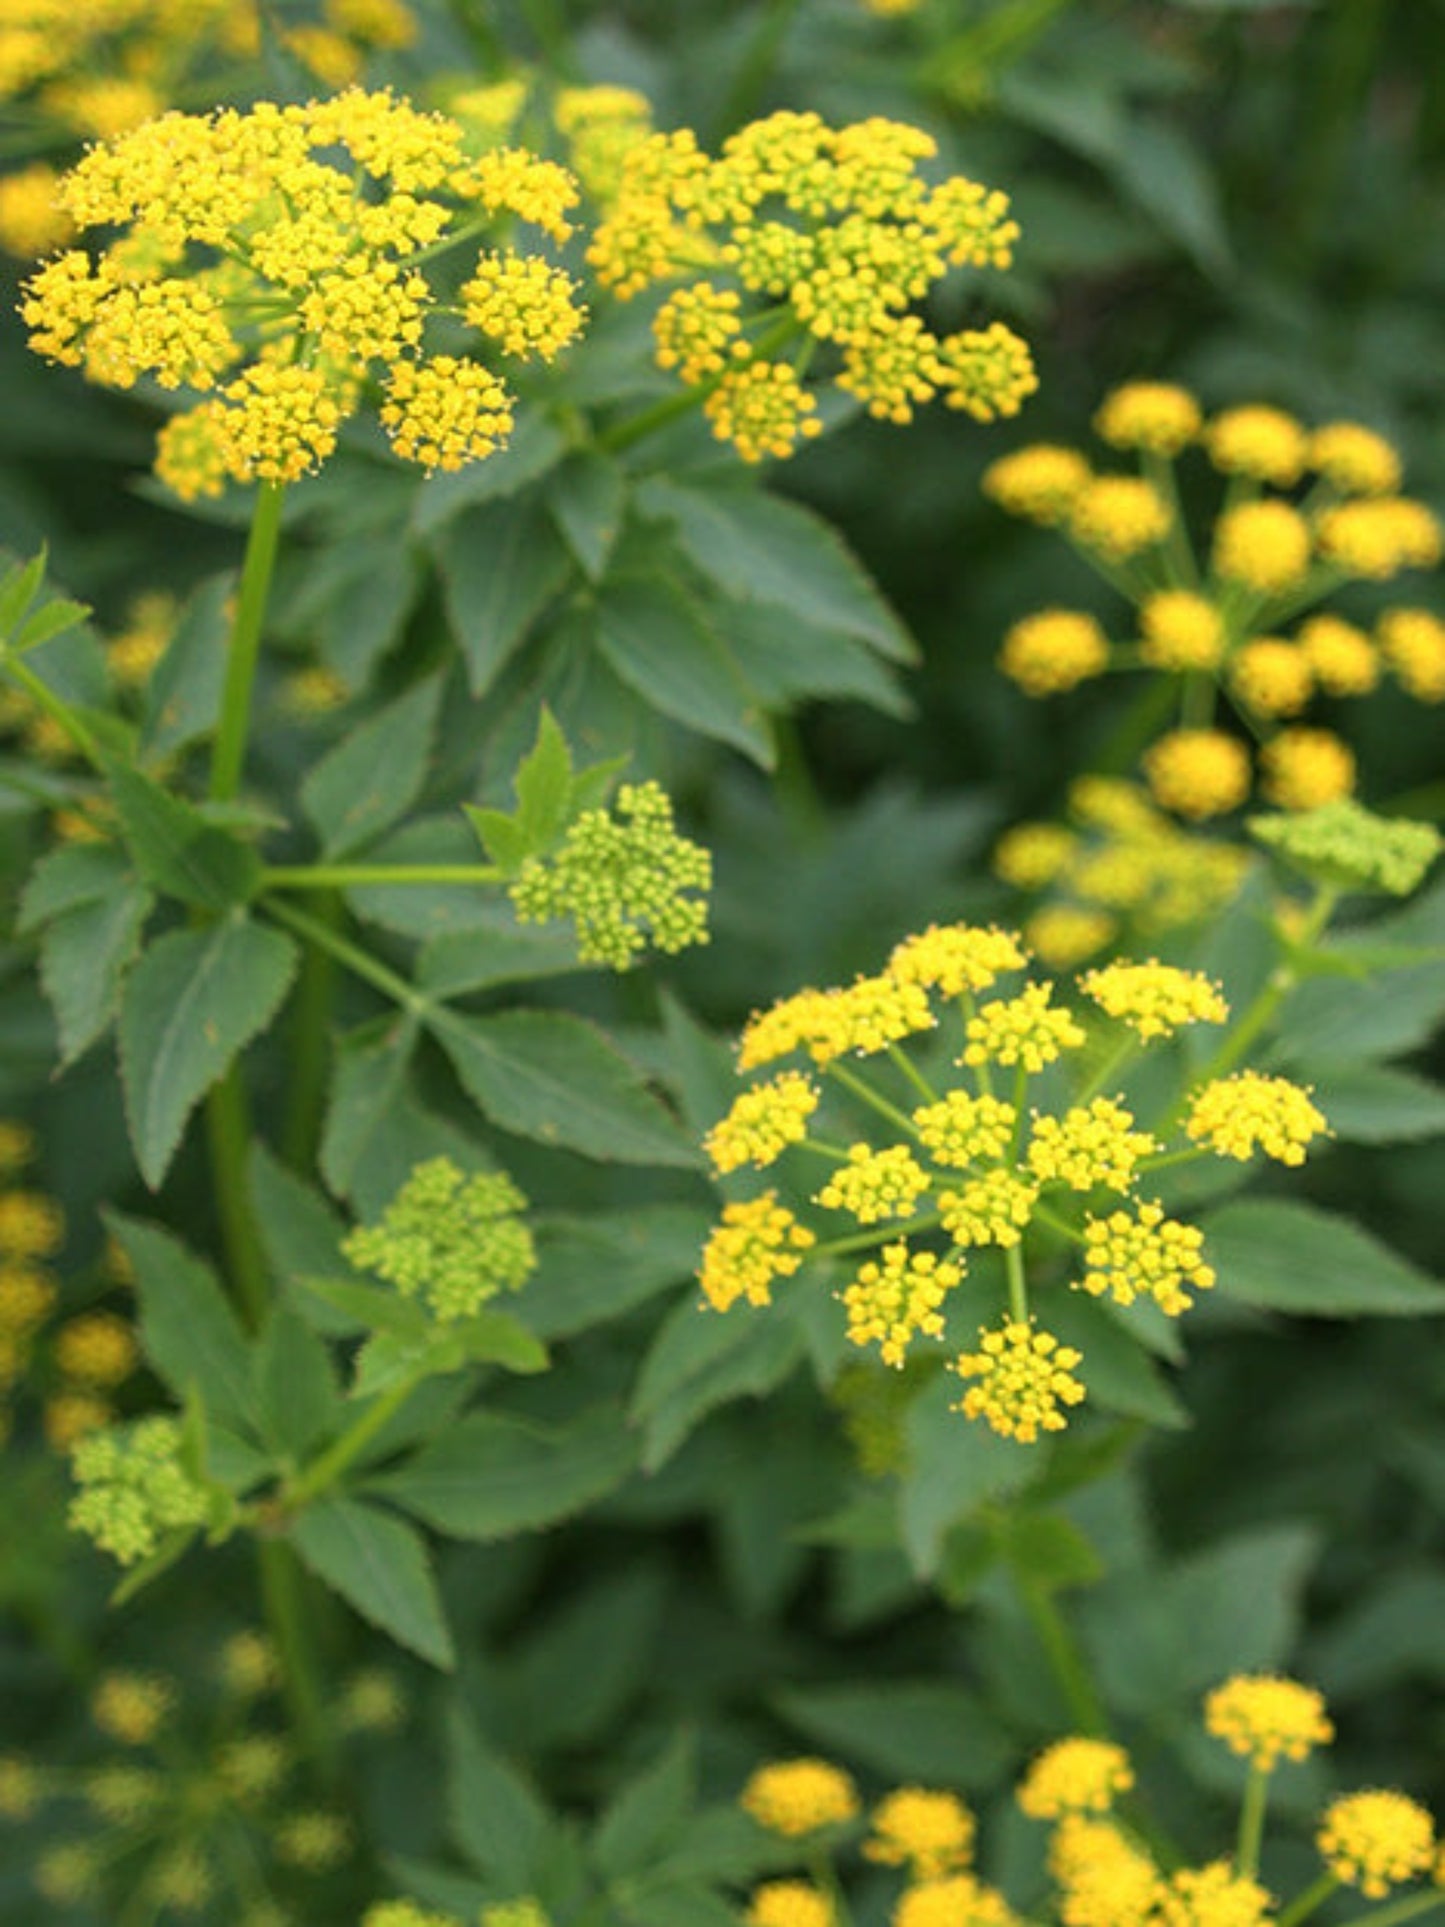 golden alexanders is the host plant for black swallowtail butterfly